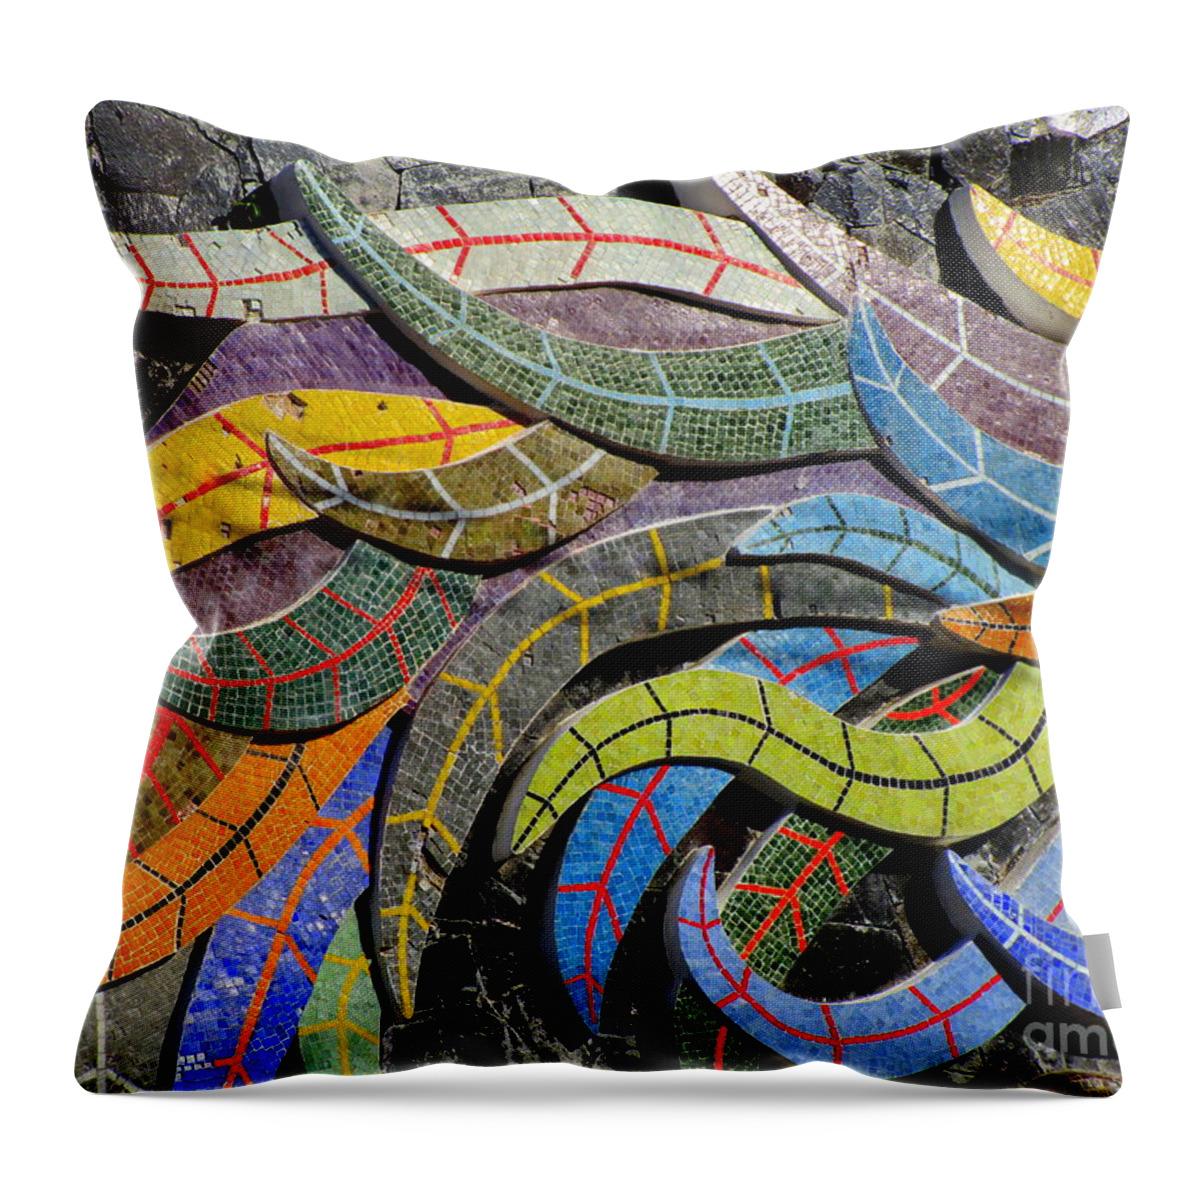 Diego Rivera Throw Pillow featuring the photograph Diego Rivera Mural 6 by Randall Weidner